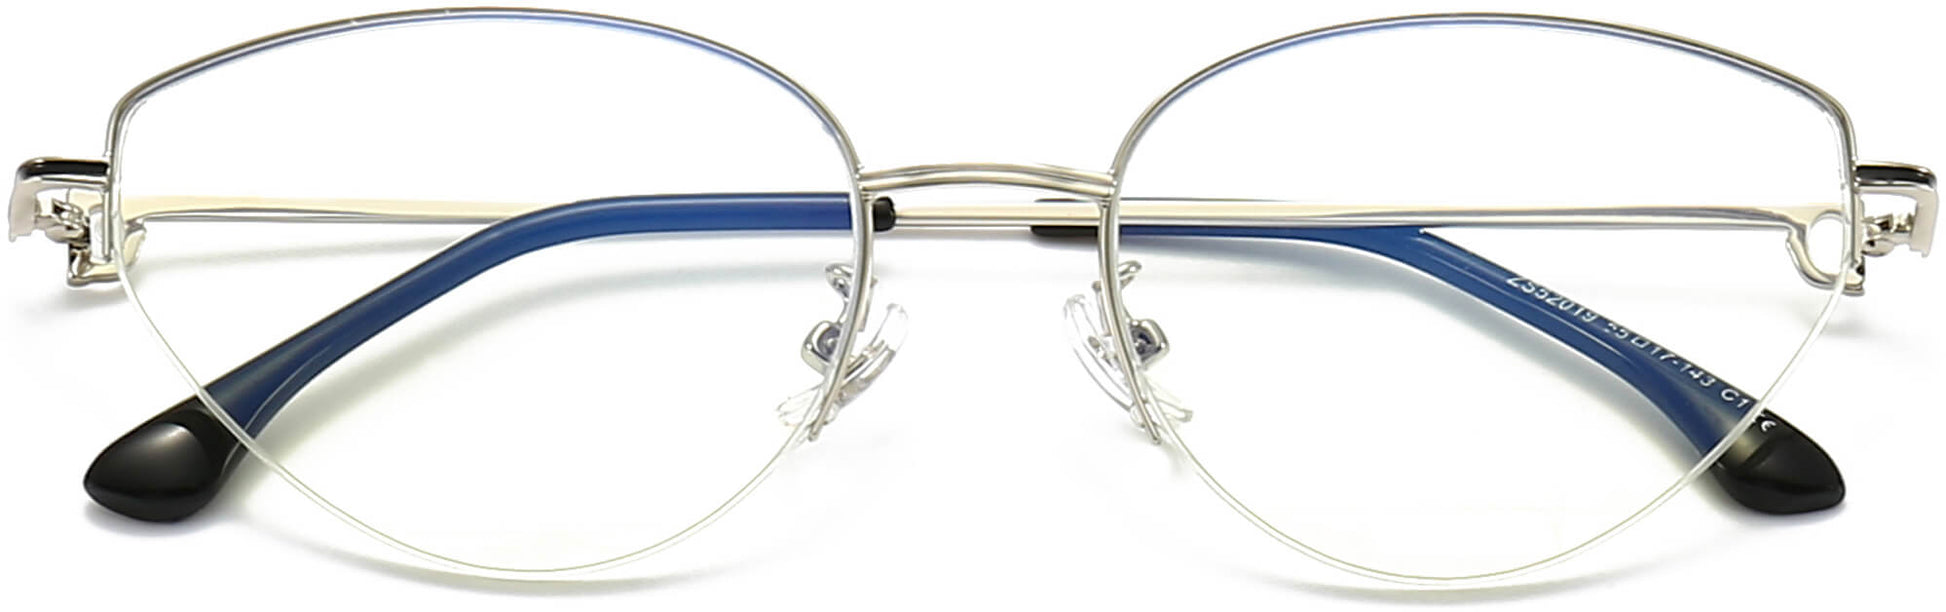 Blaire Cateye Silver Eyeglasses from ANRRI, closed view